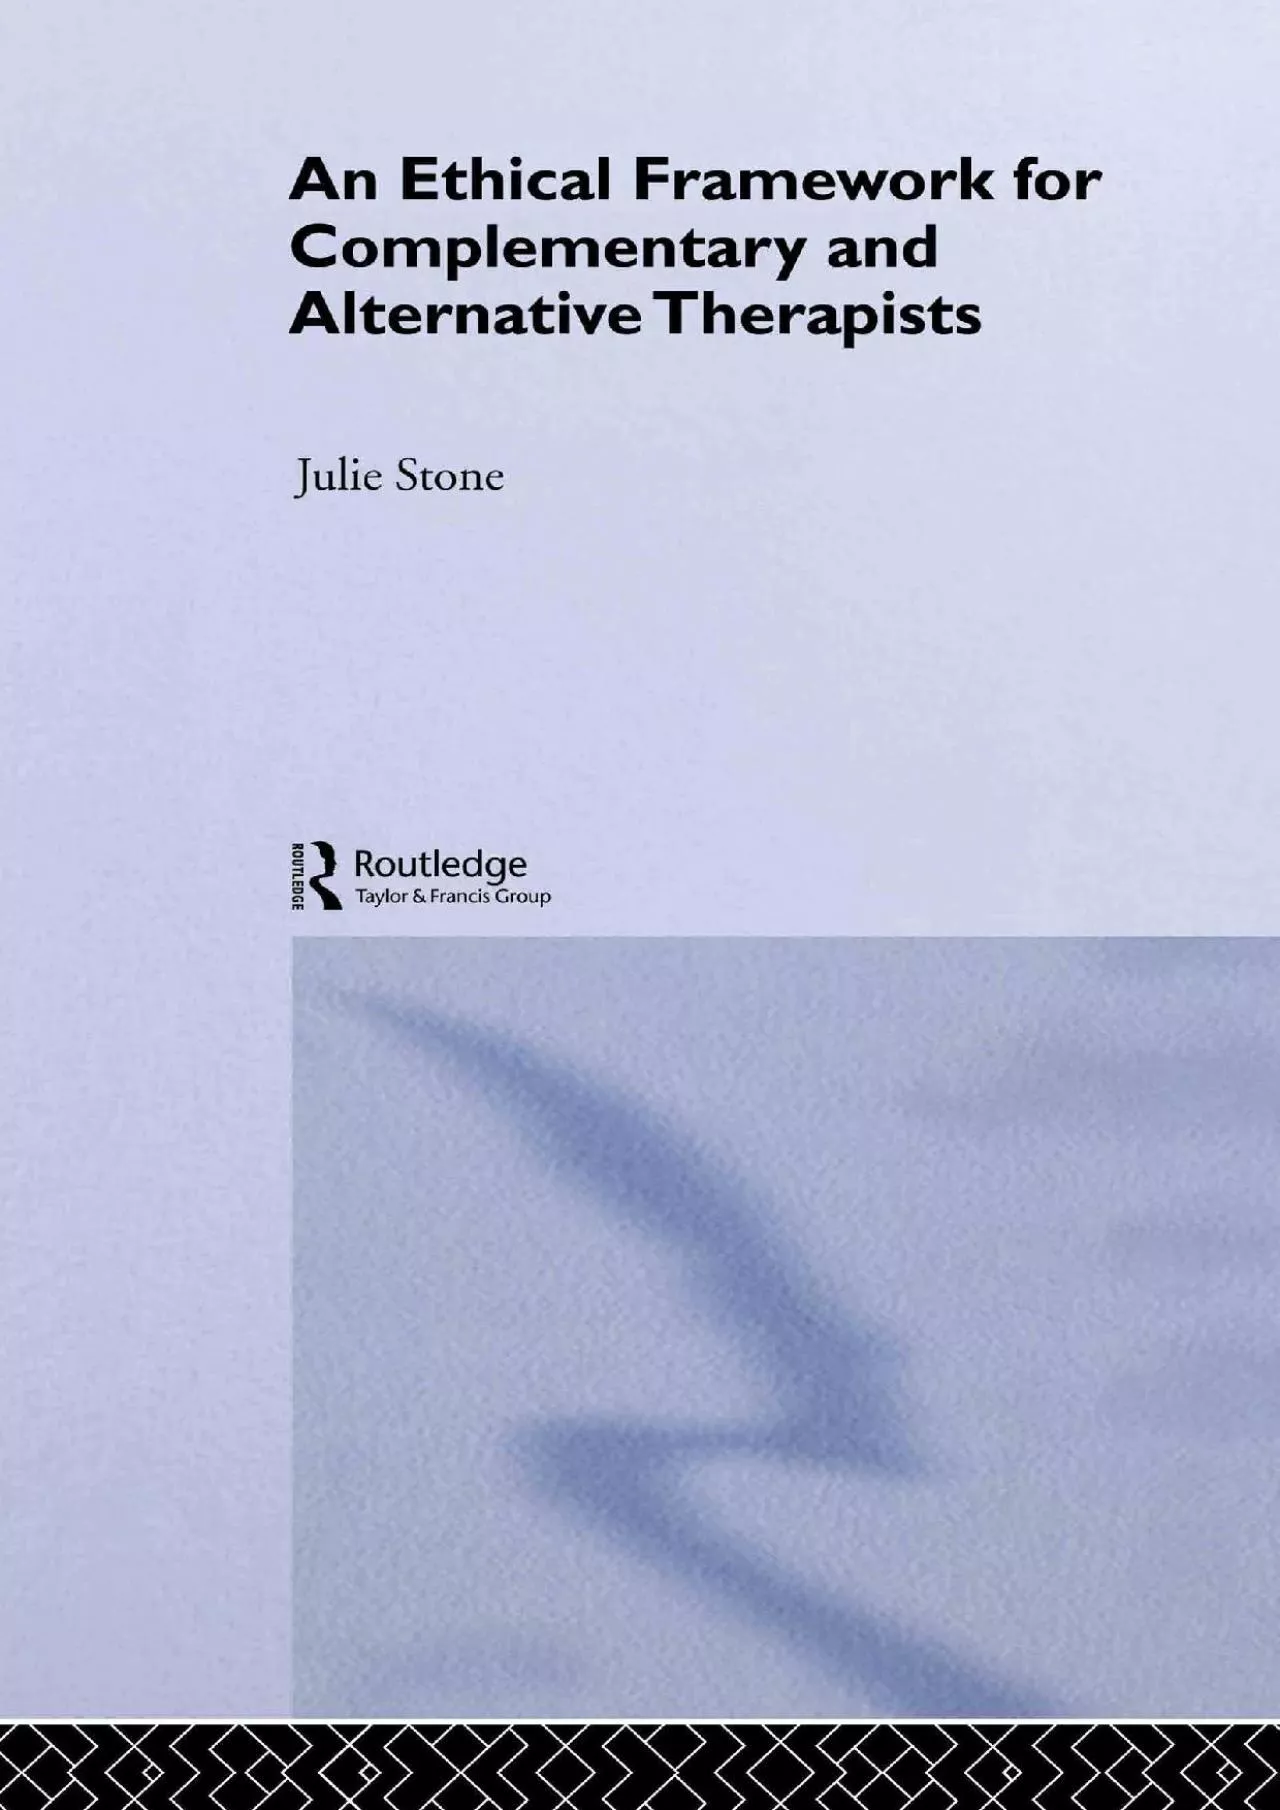 (DOWNLOAD)-An Ethical Framework for Complementary and Alternative Therapists